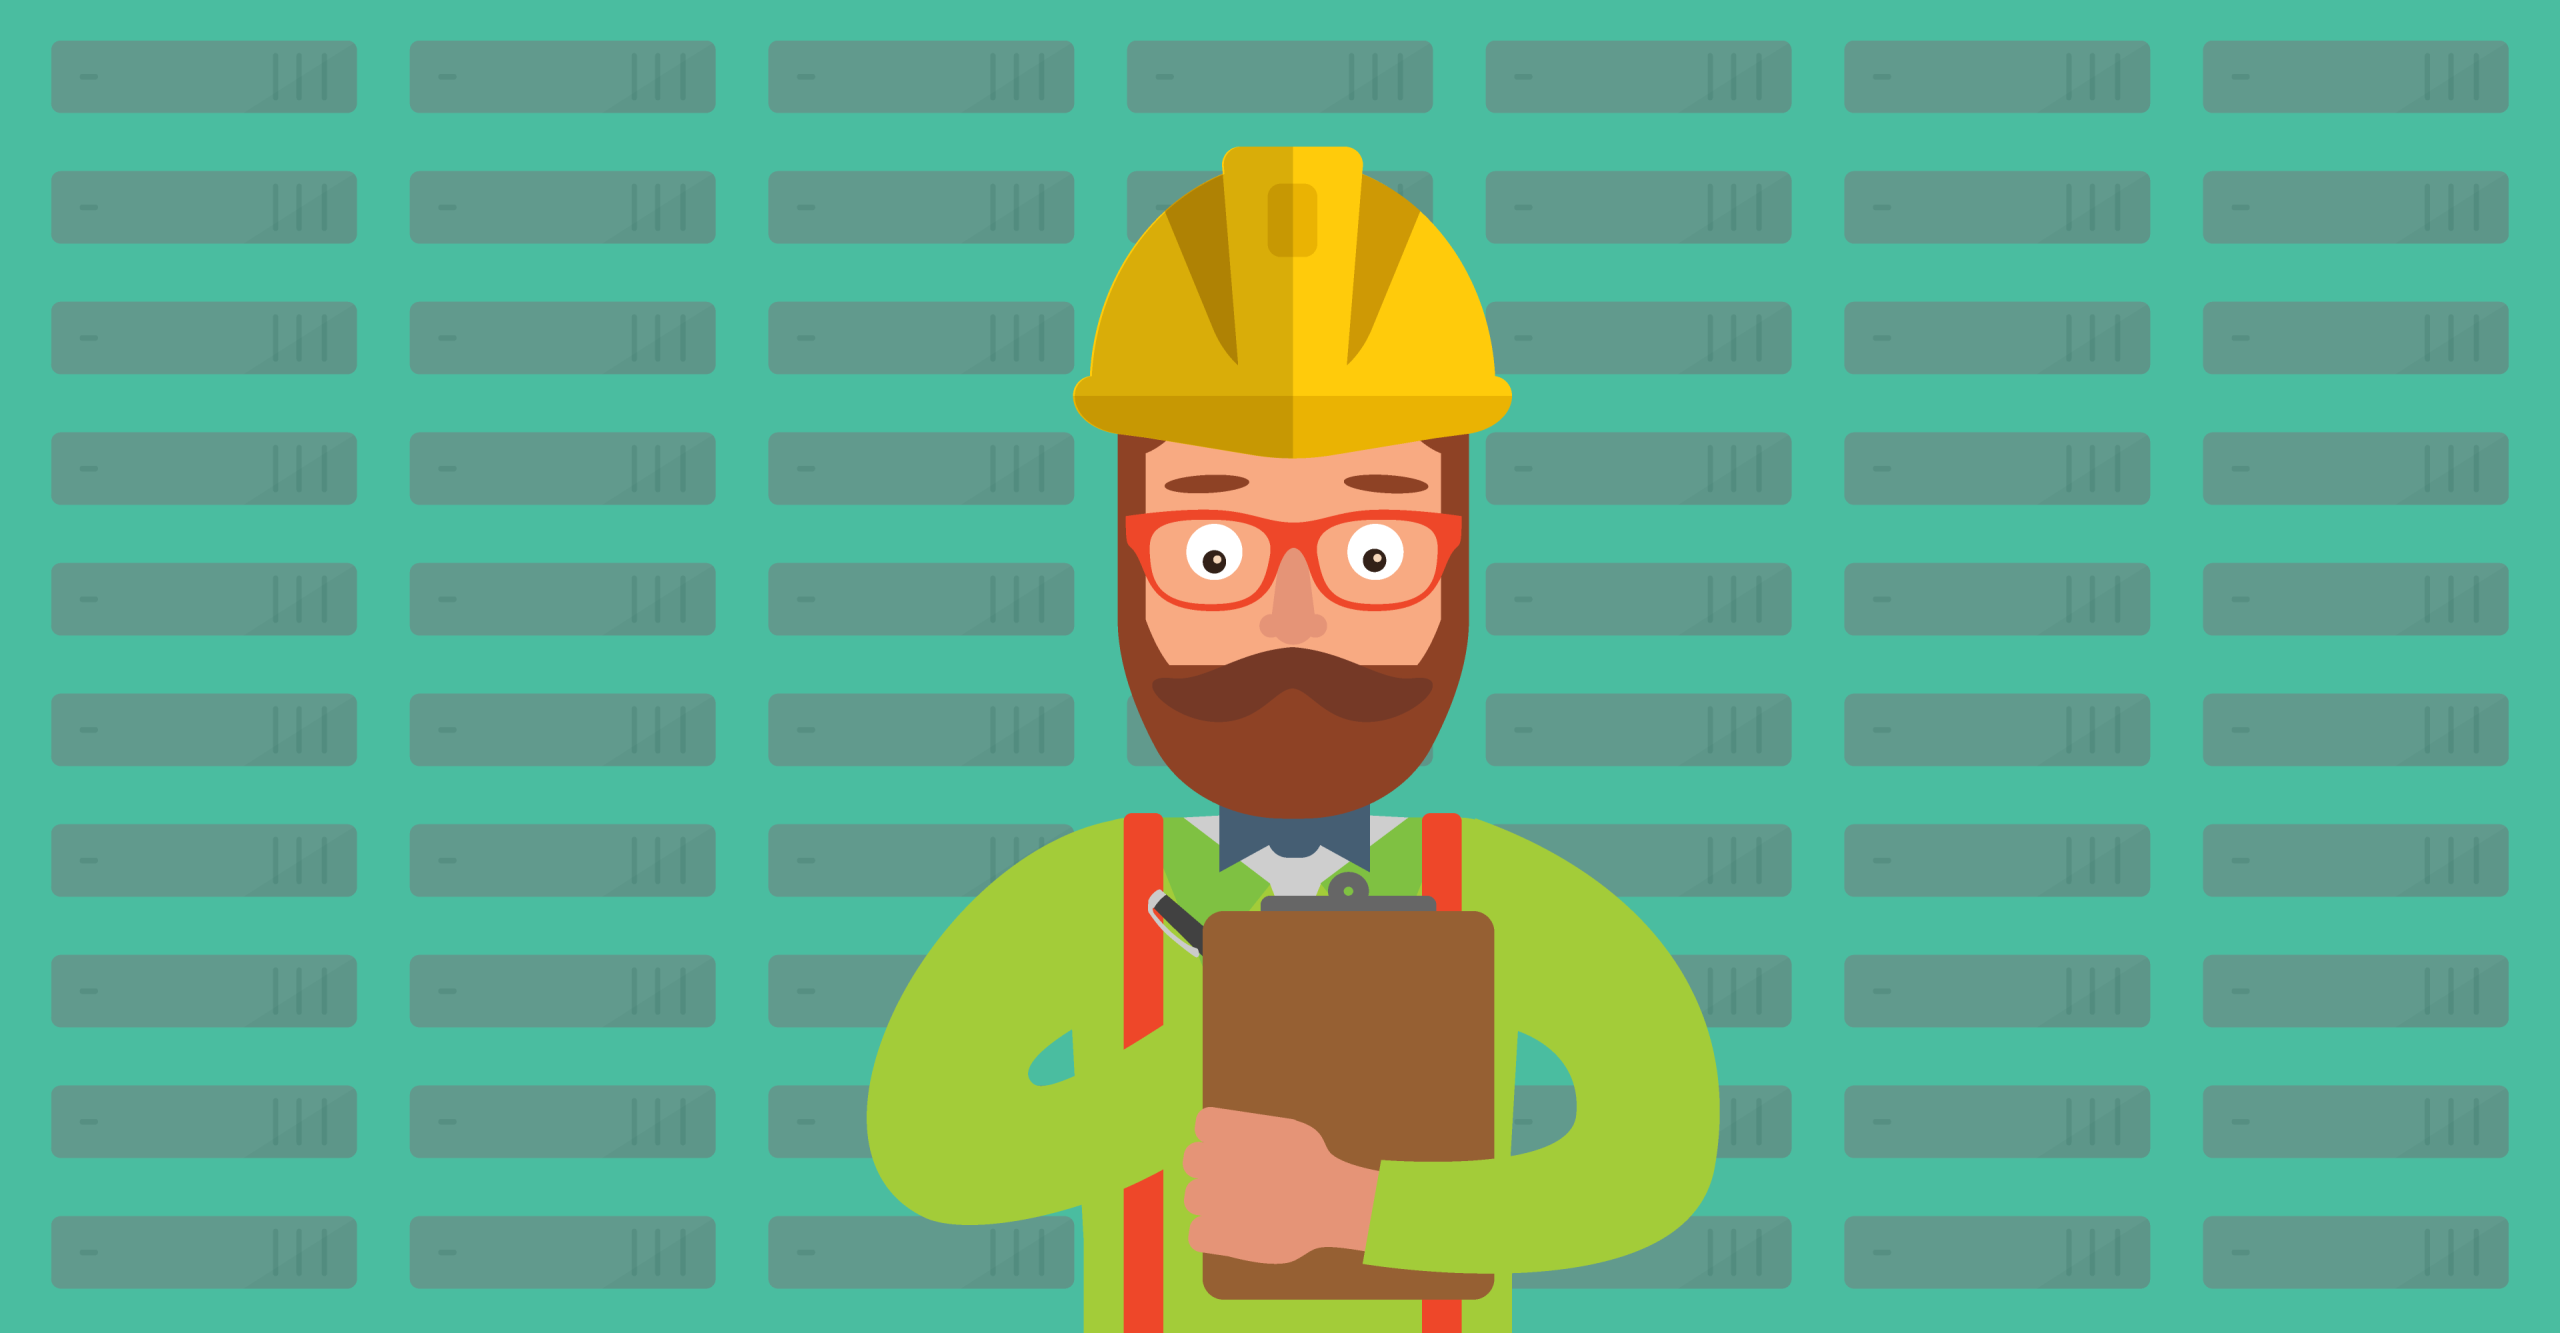 Illustration of a construction worker wearing a yellow hard hat and red glasses, holding a clipboard. He has a beard and is dressed in a green shirt with red suspenders. The background features a teal brick pattern.